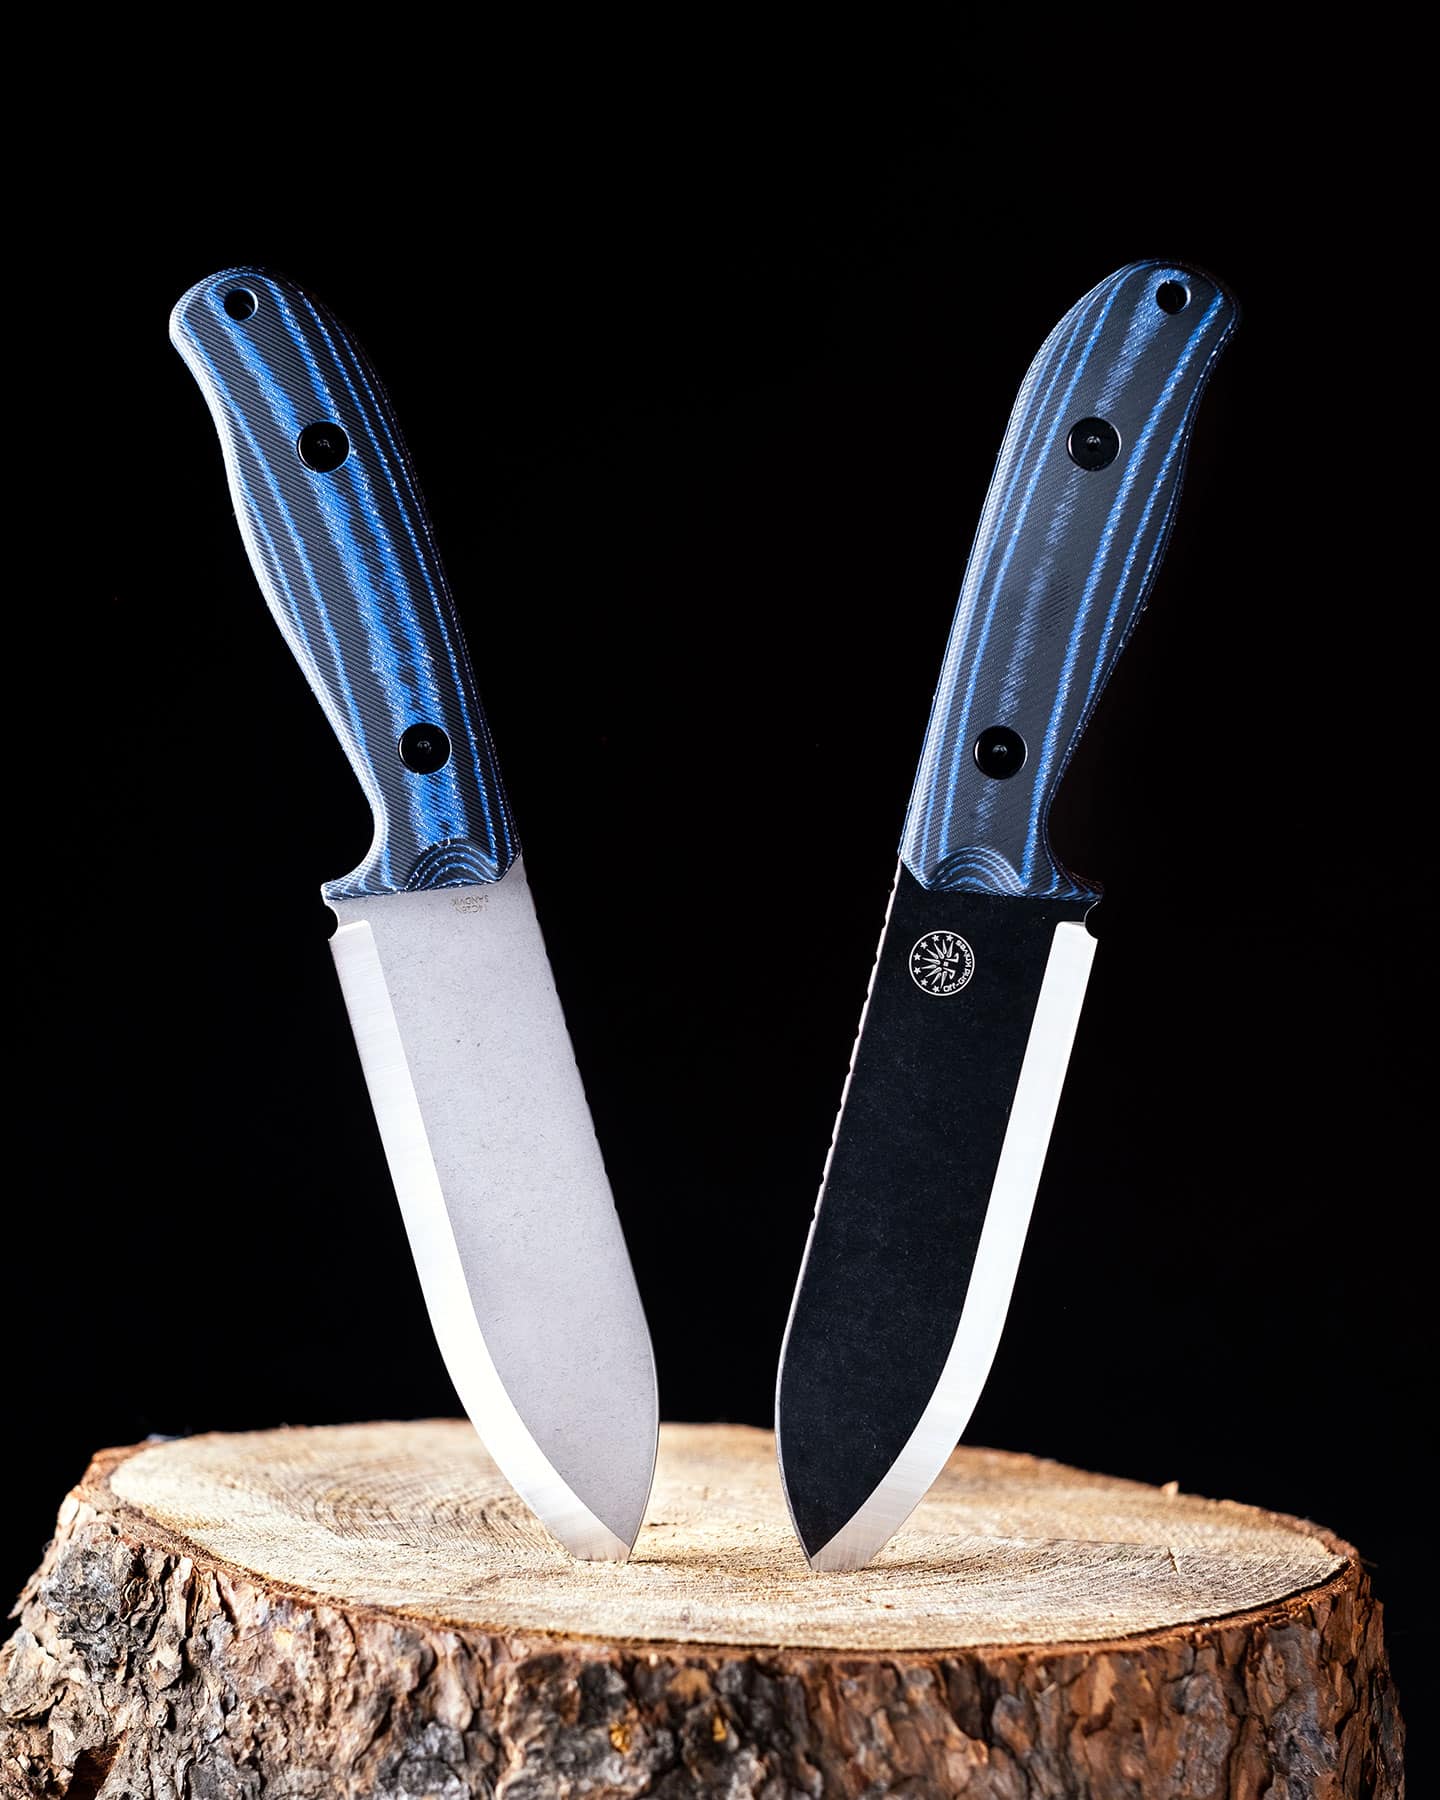 Header image for our in-depth review of the Off-Grid Ridgeback bushcraft knife.